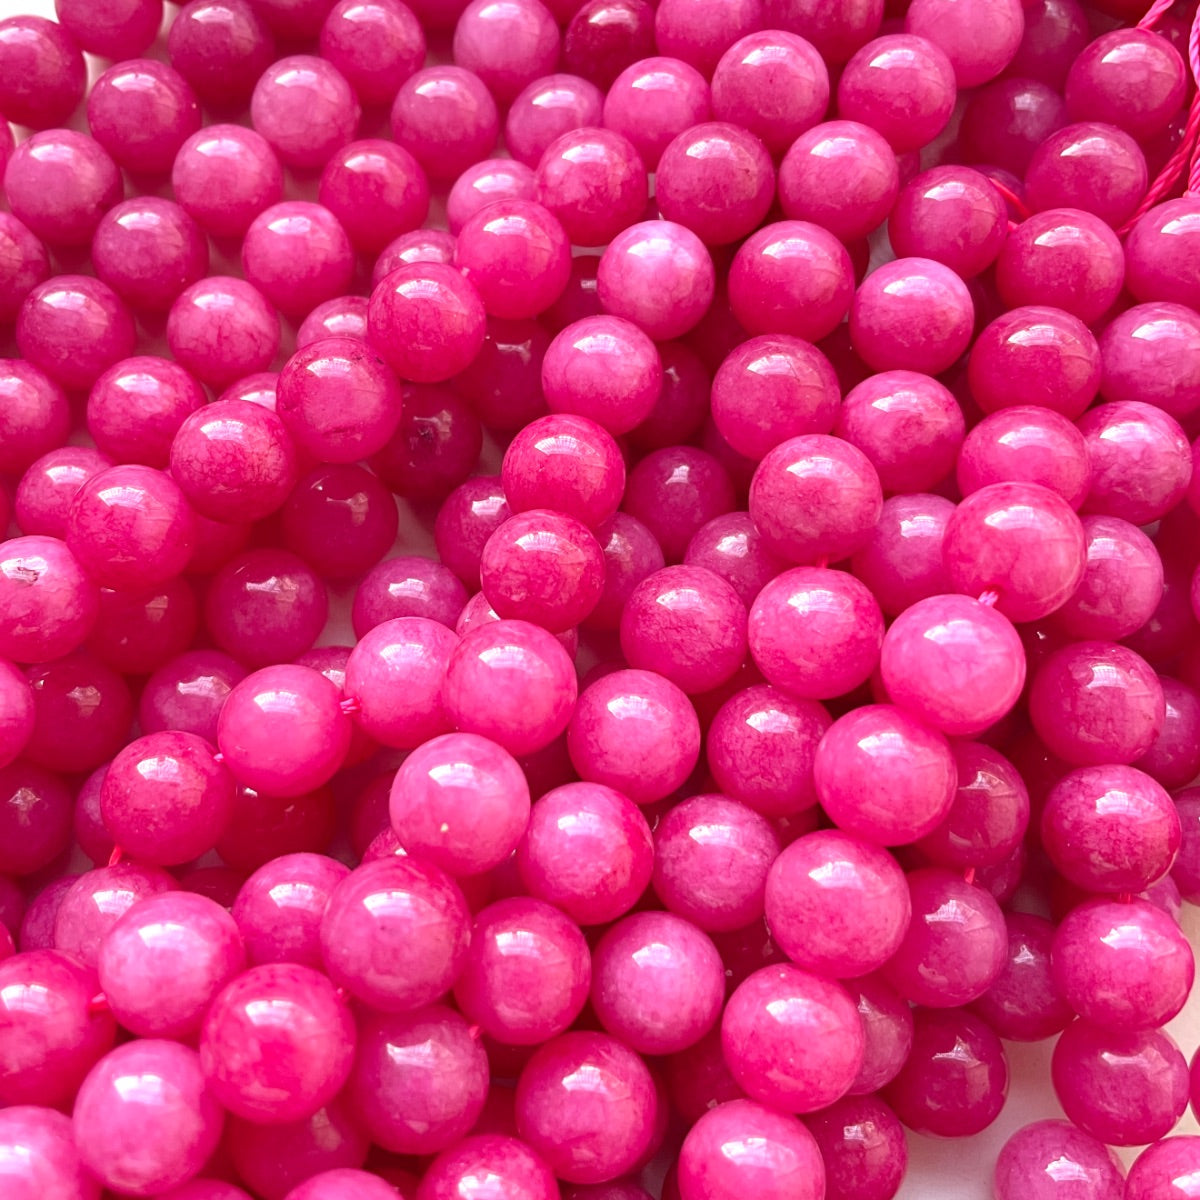 2 Strands/lot 10/12mm Hot Pink Fuchsia Chalcedony Jade Round Stone Beads Stone Beads 12mm Stone Beads Breast Cancer Awareness New Beads Arrivals Other Stone Beads Charms Beads Beyond